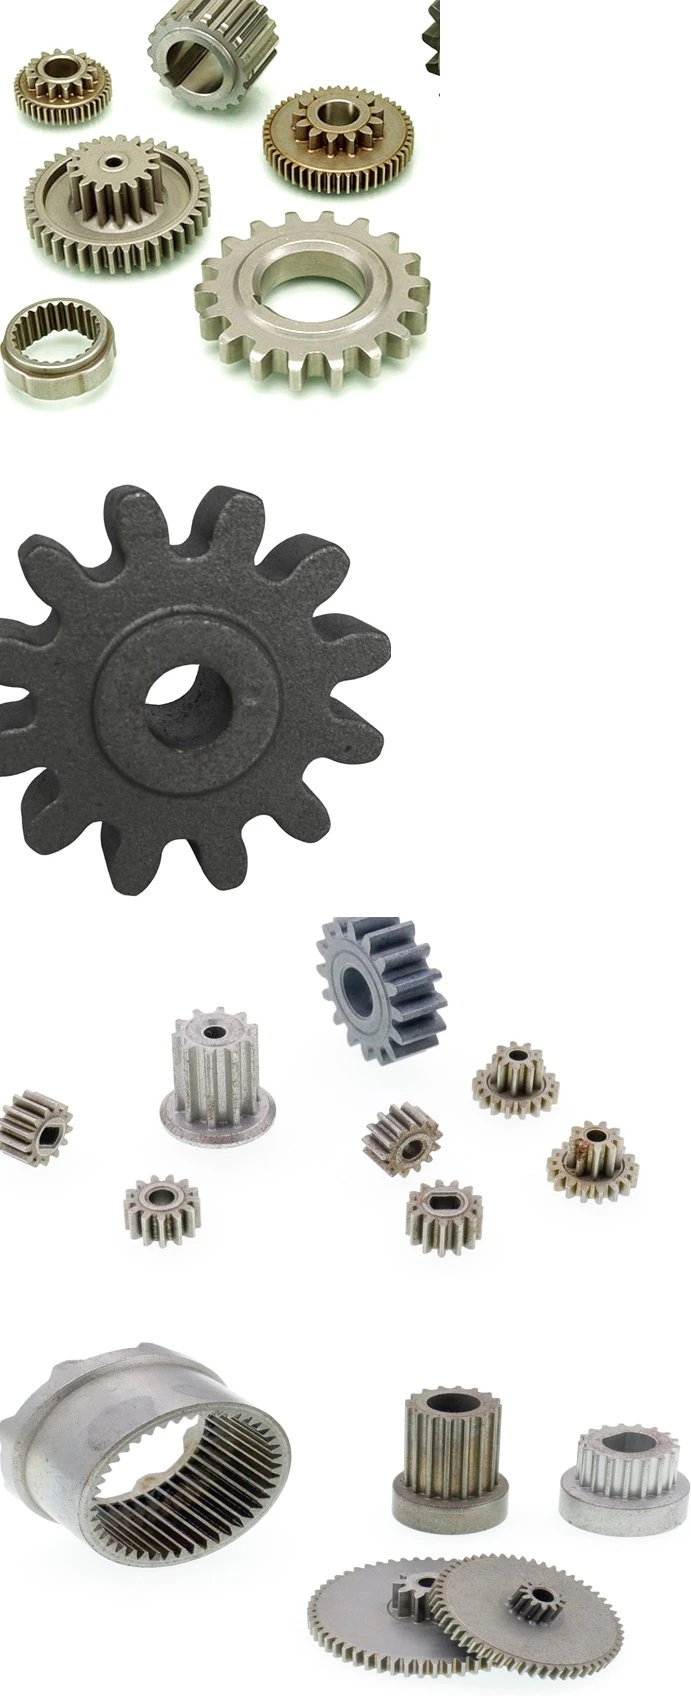 Powder Metallurgy Hardware Tools and Fittings Lock Core Fittings Metal Sintered Component Gear